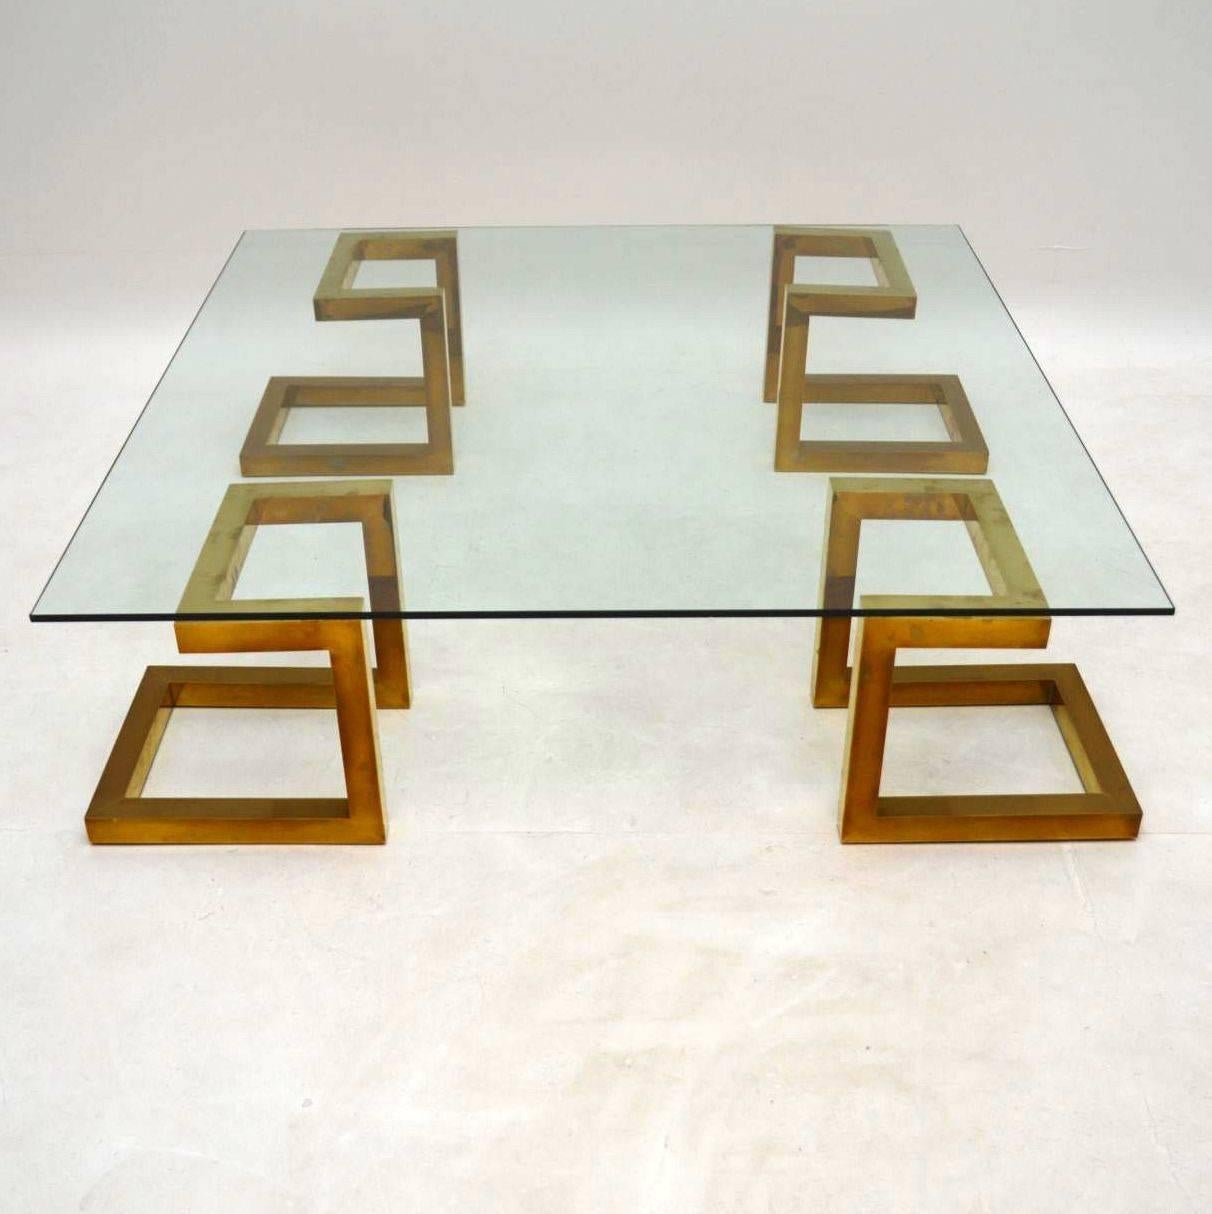 A stunning and very impressive vintage coffee table, this was made in Italy, it dates from the 1970s. It has four separate supporting brass columns and a thick, clear glass top. The condition is superb for its age, with some minor wear commensurate